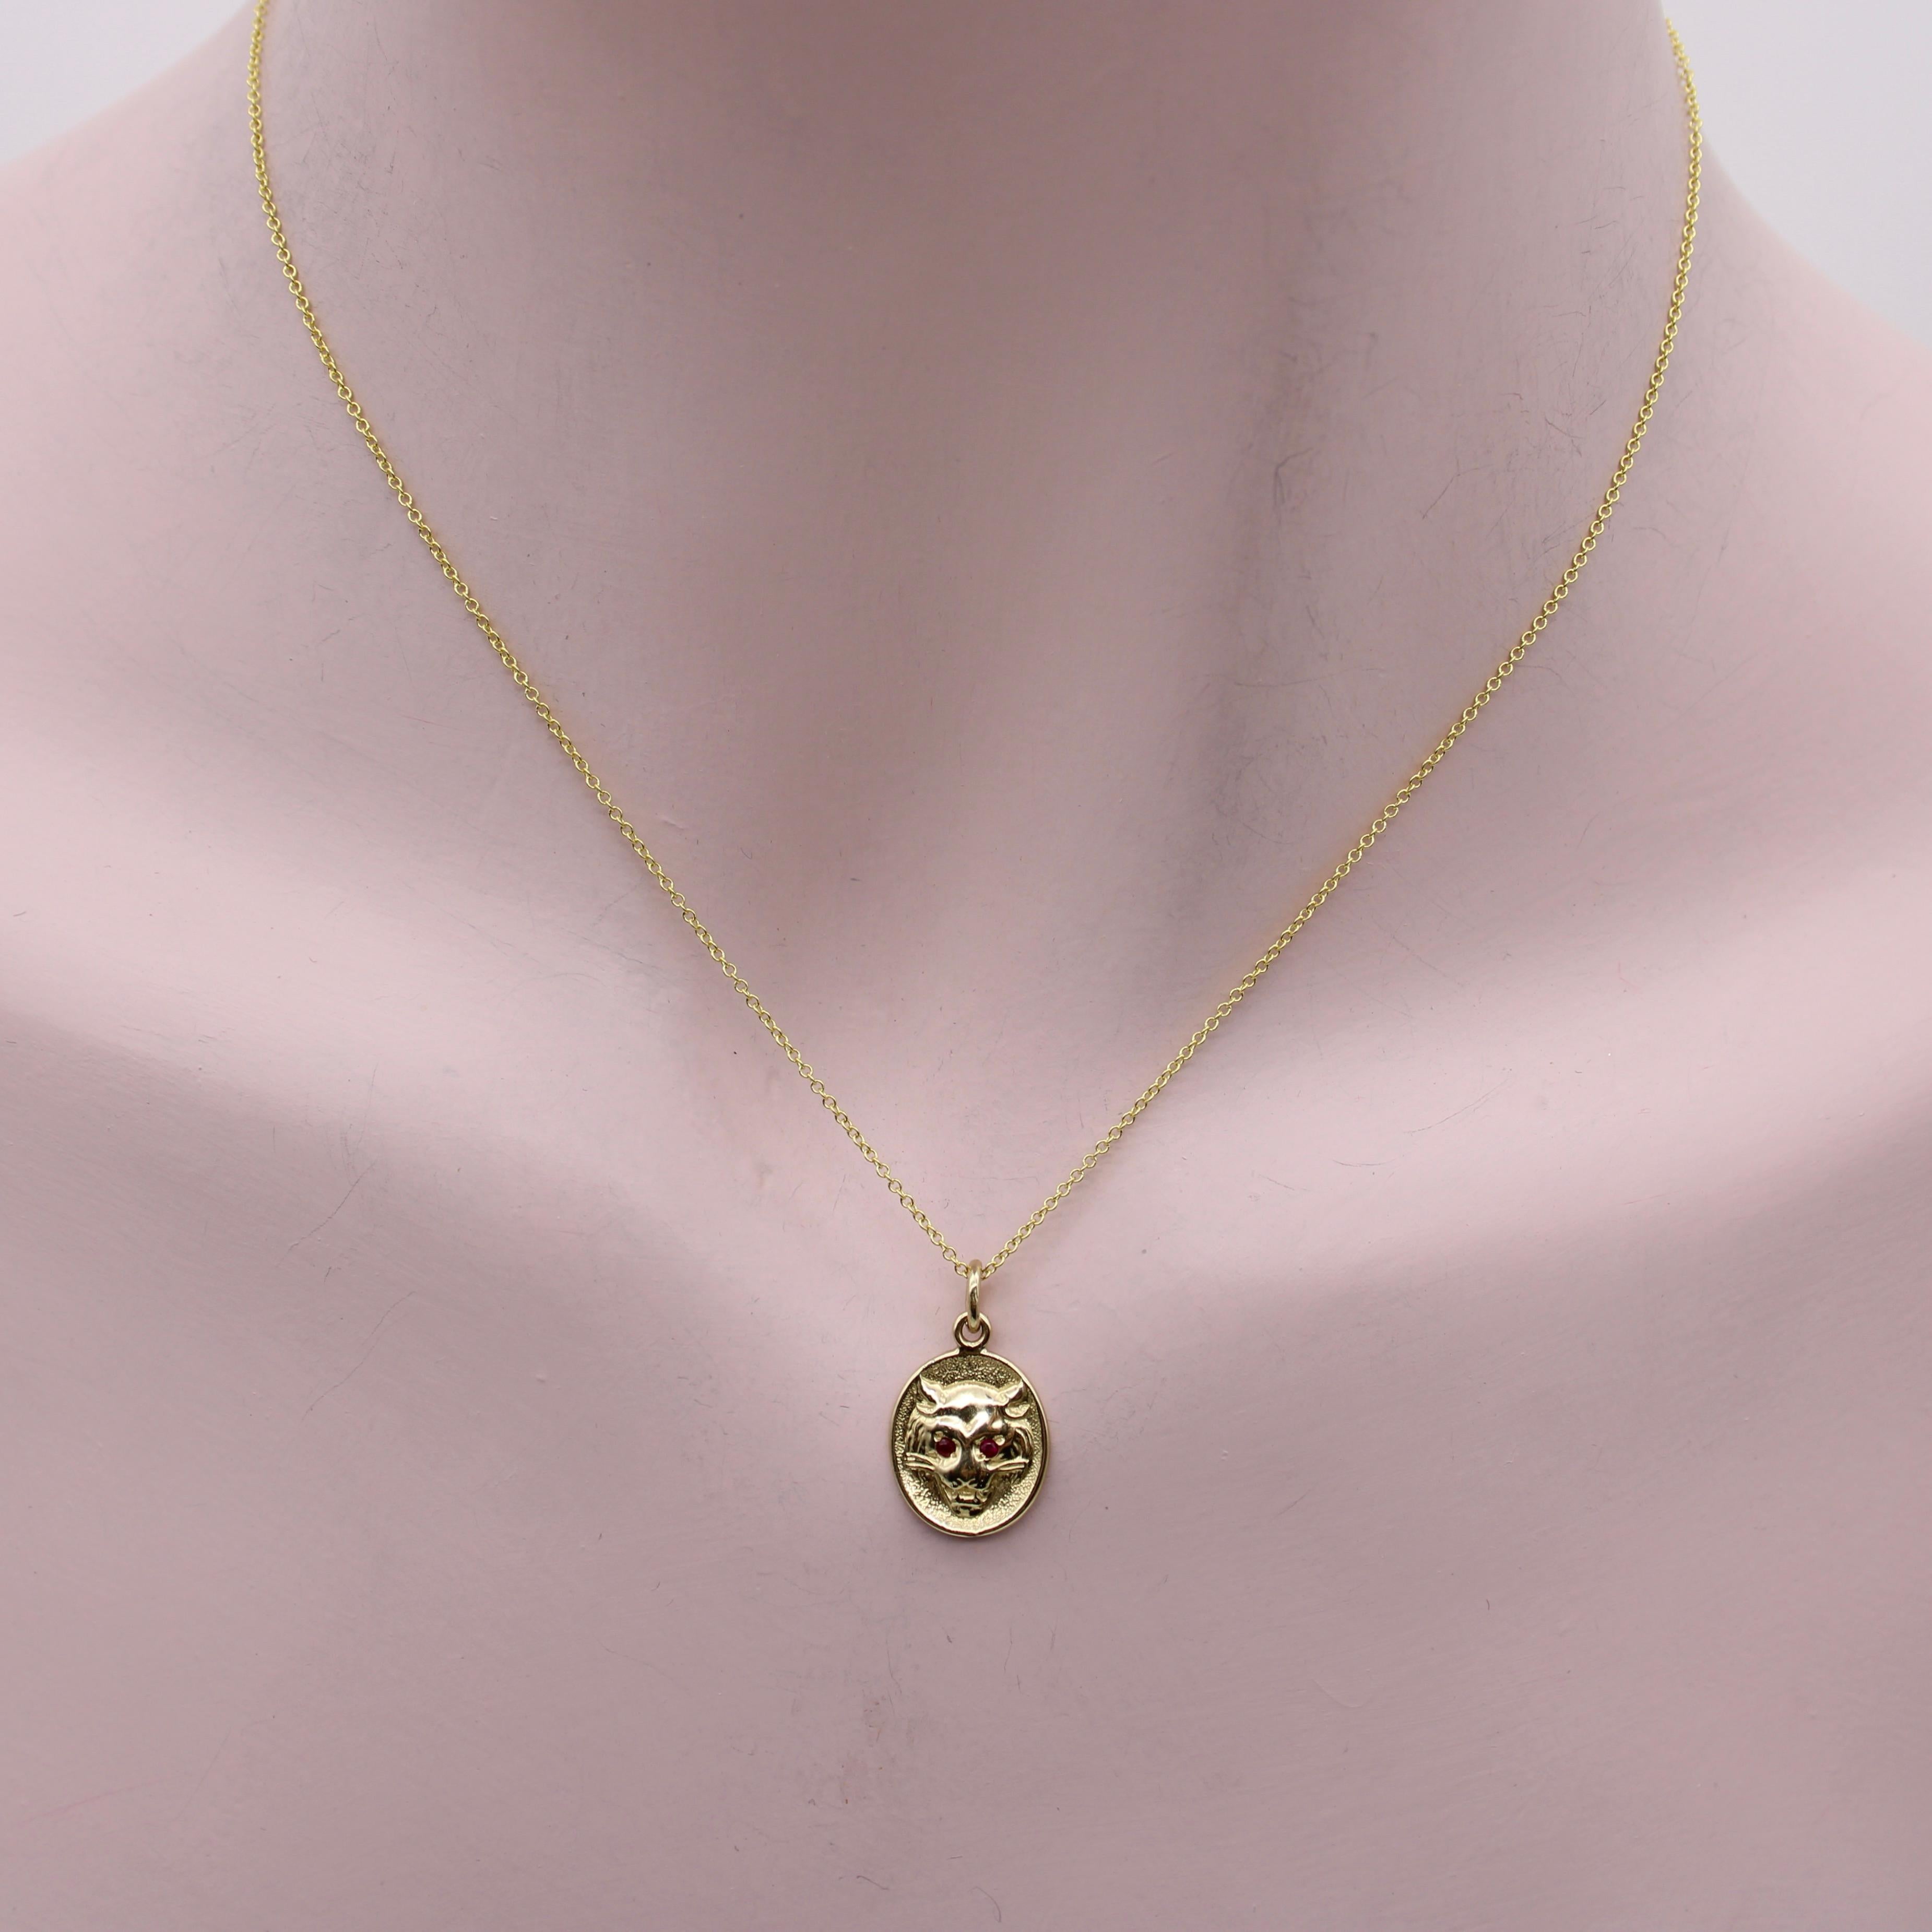 This 14K gold Victorian inspired pendant or charm features a striking bas-relief of a lioness' head with ruby eyes. This Signature piece is part of our Cute-As-A-Button collection. It's been carefully molded from Victorian era cufflinks and is now